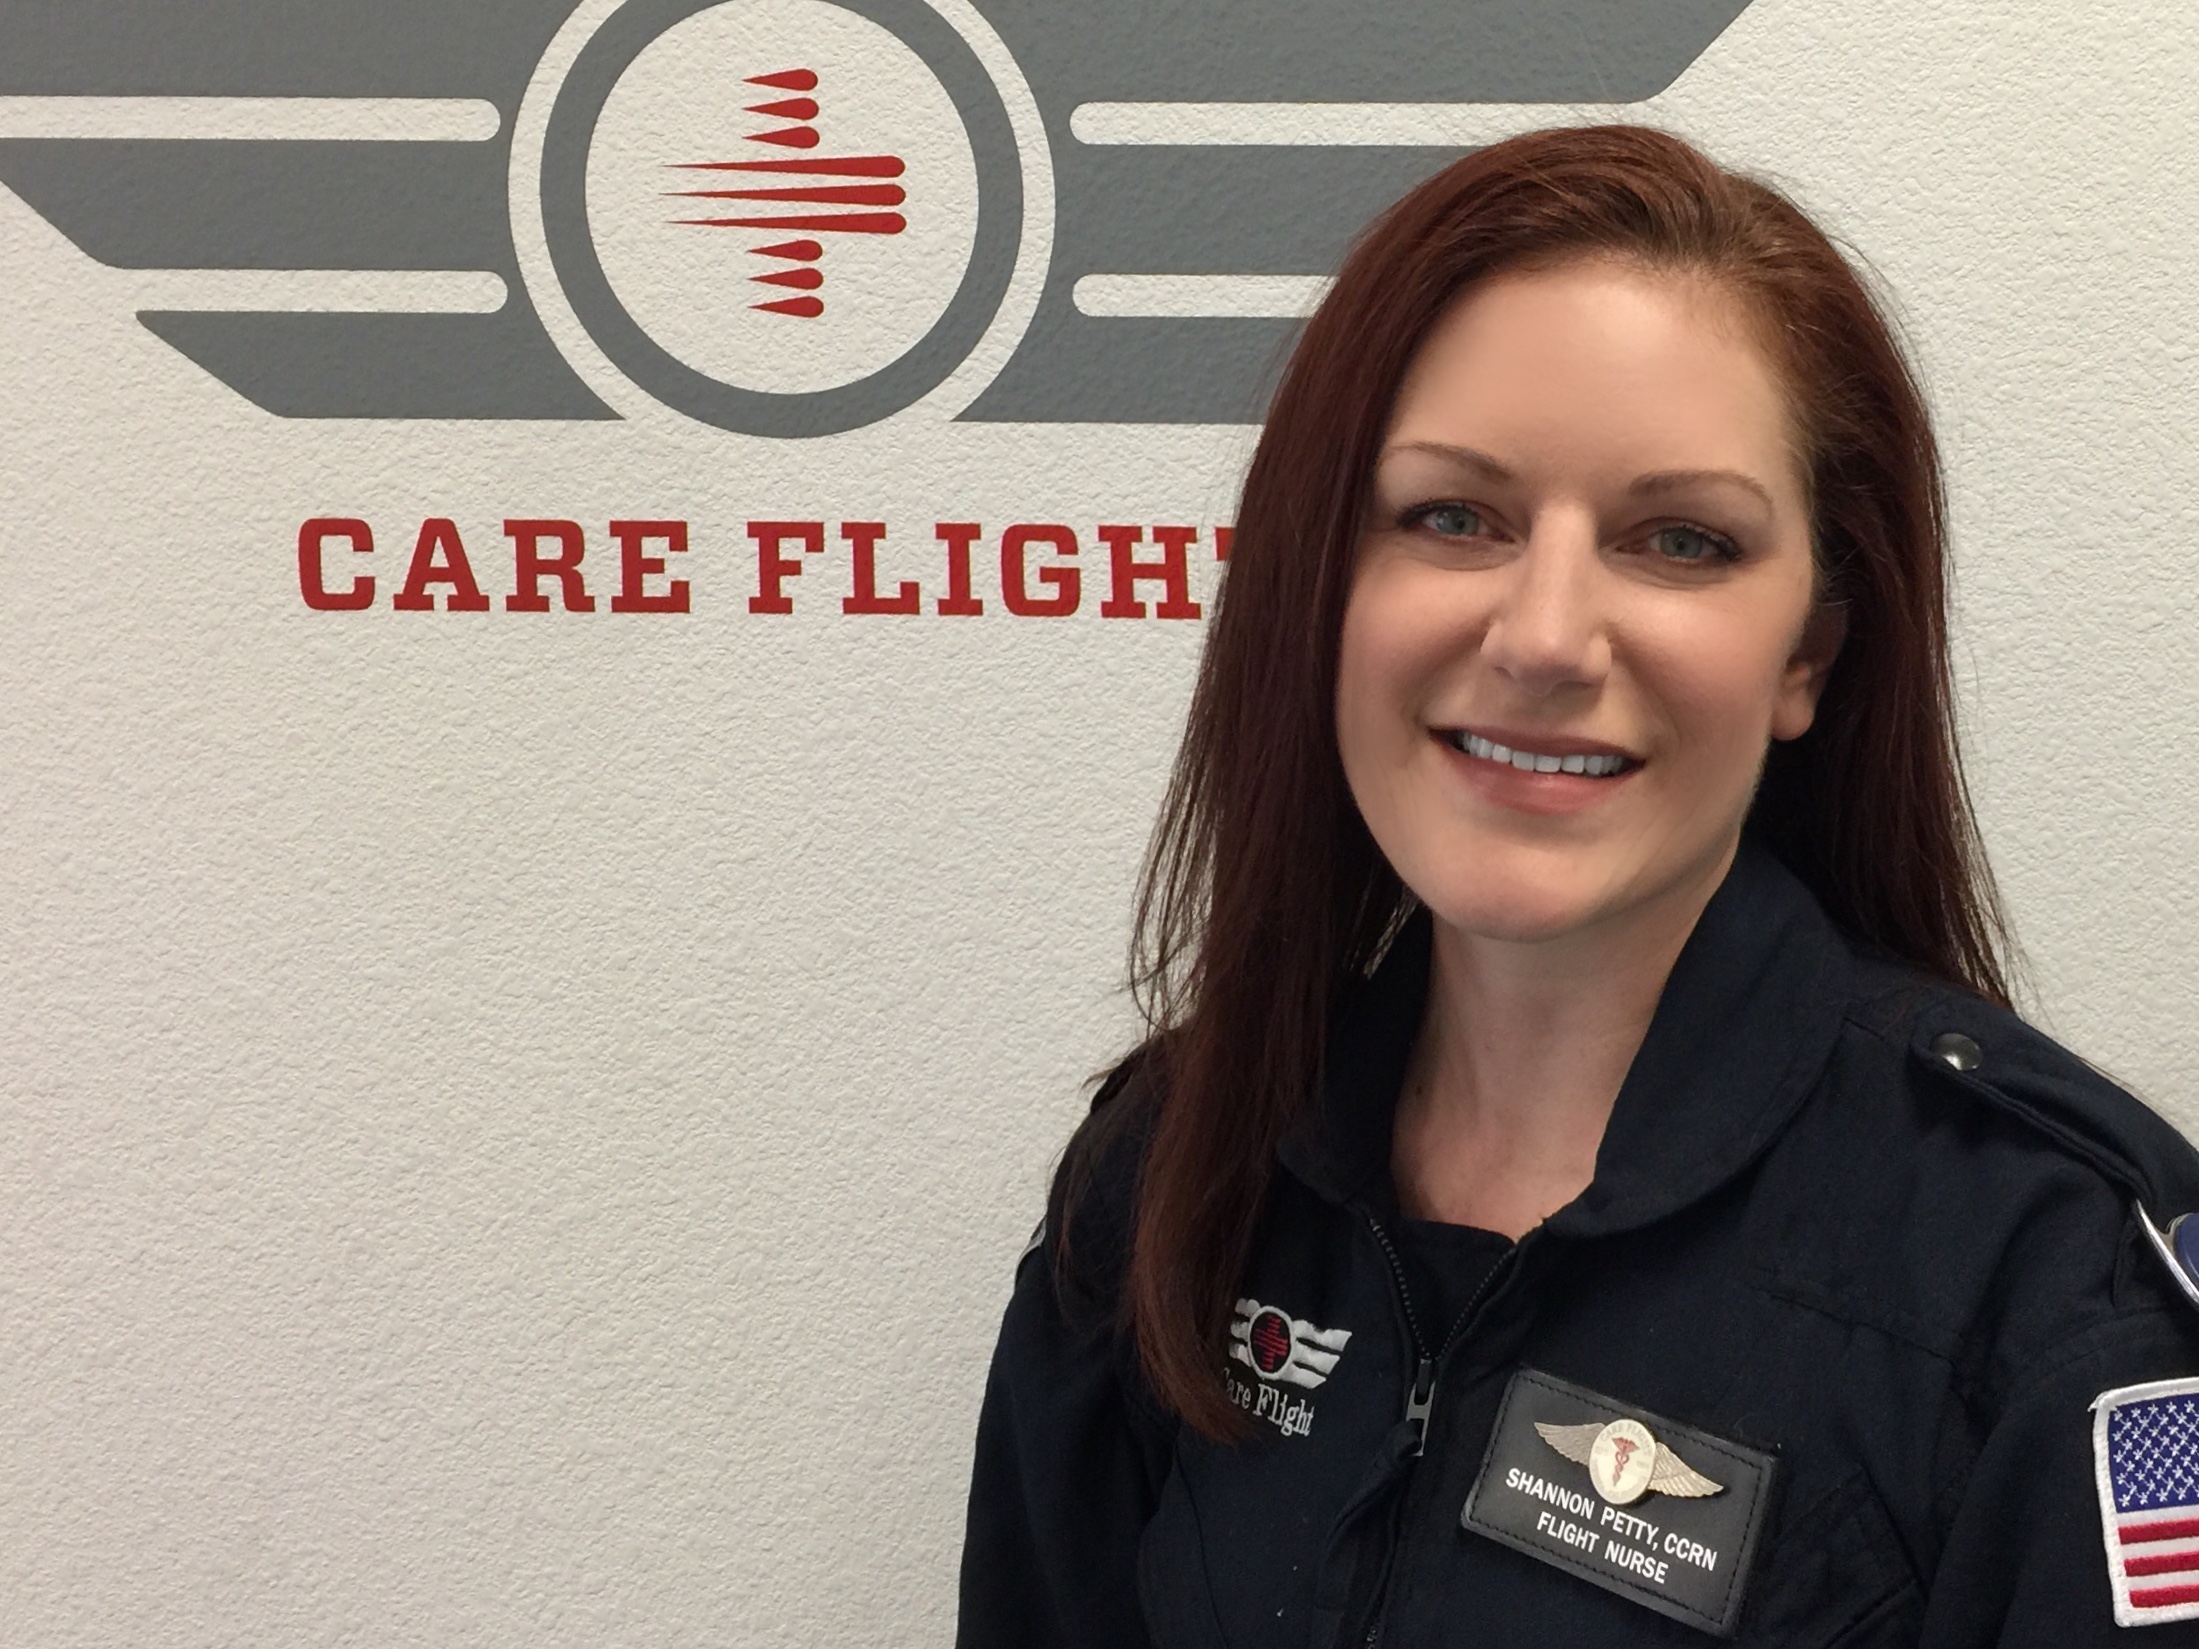 The REMSA and Care Flight announce the promotion of Shannon Petty, RN, CRFN, to the position of Care Flight’s base supervisor.